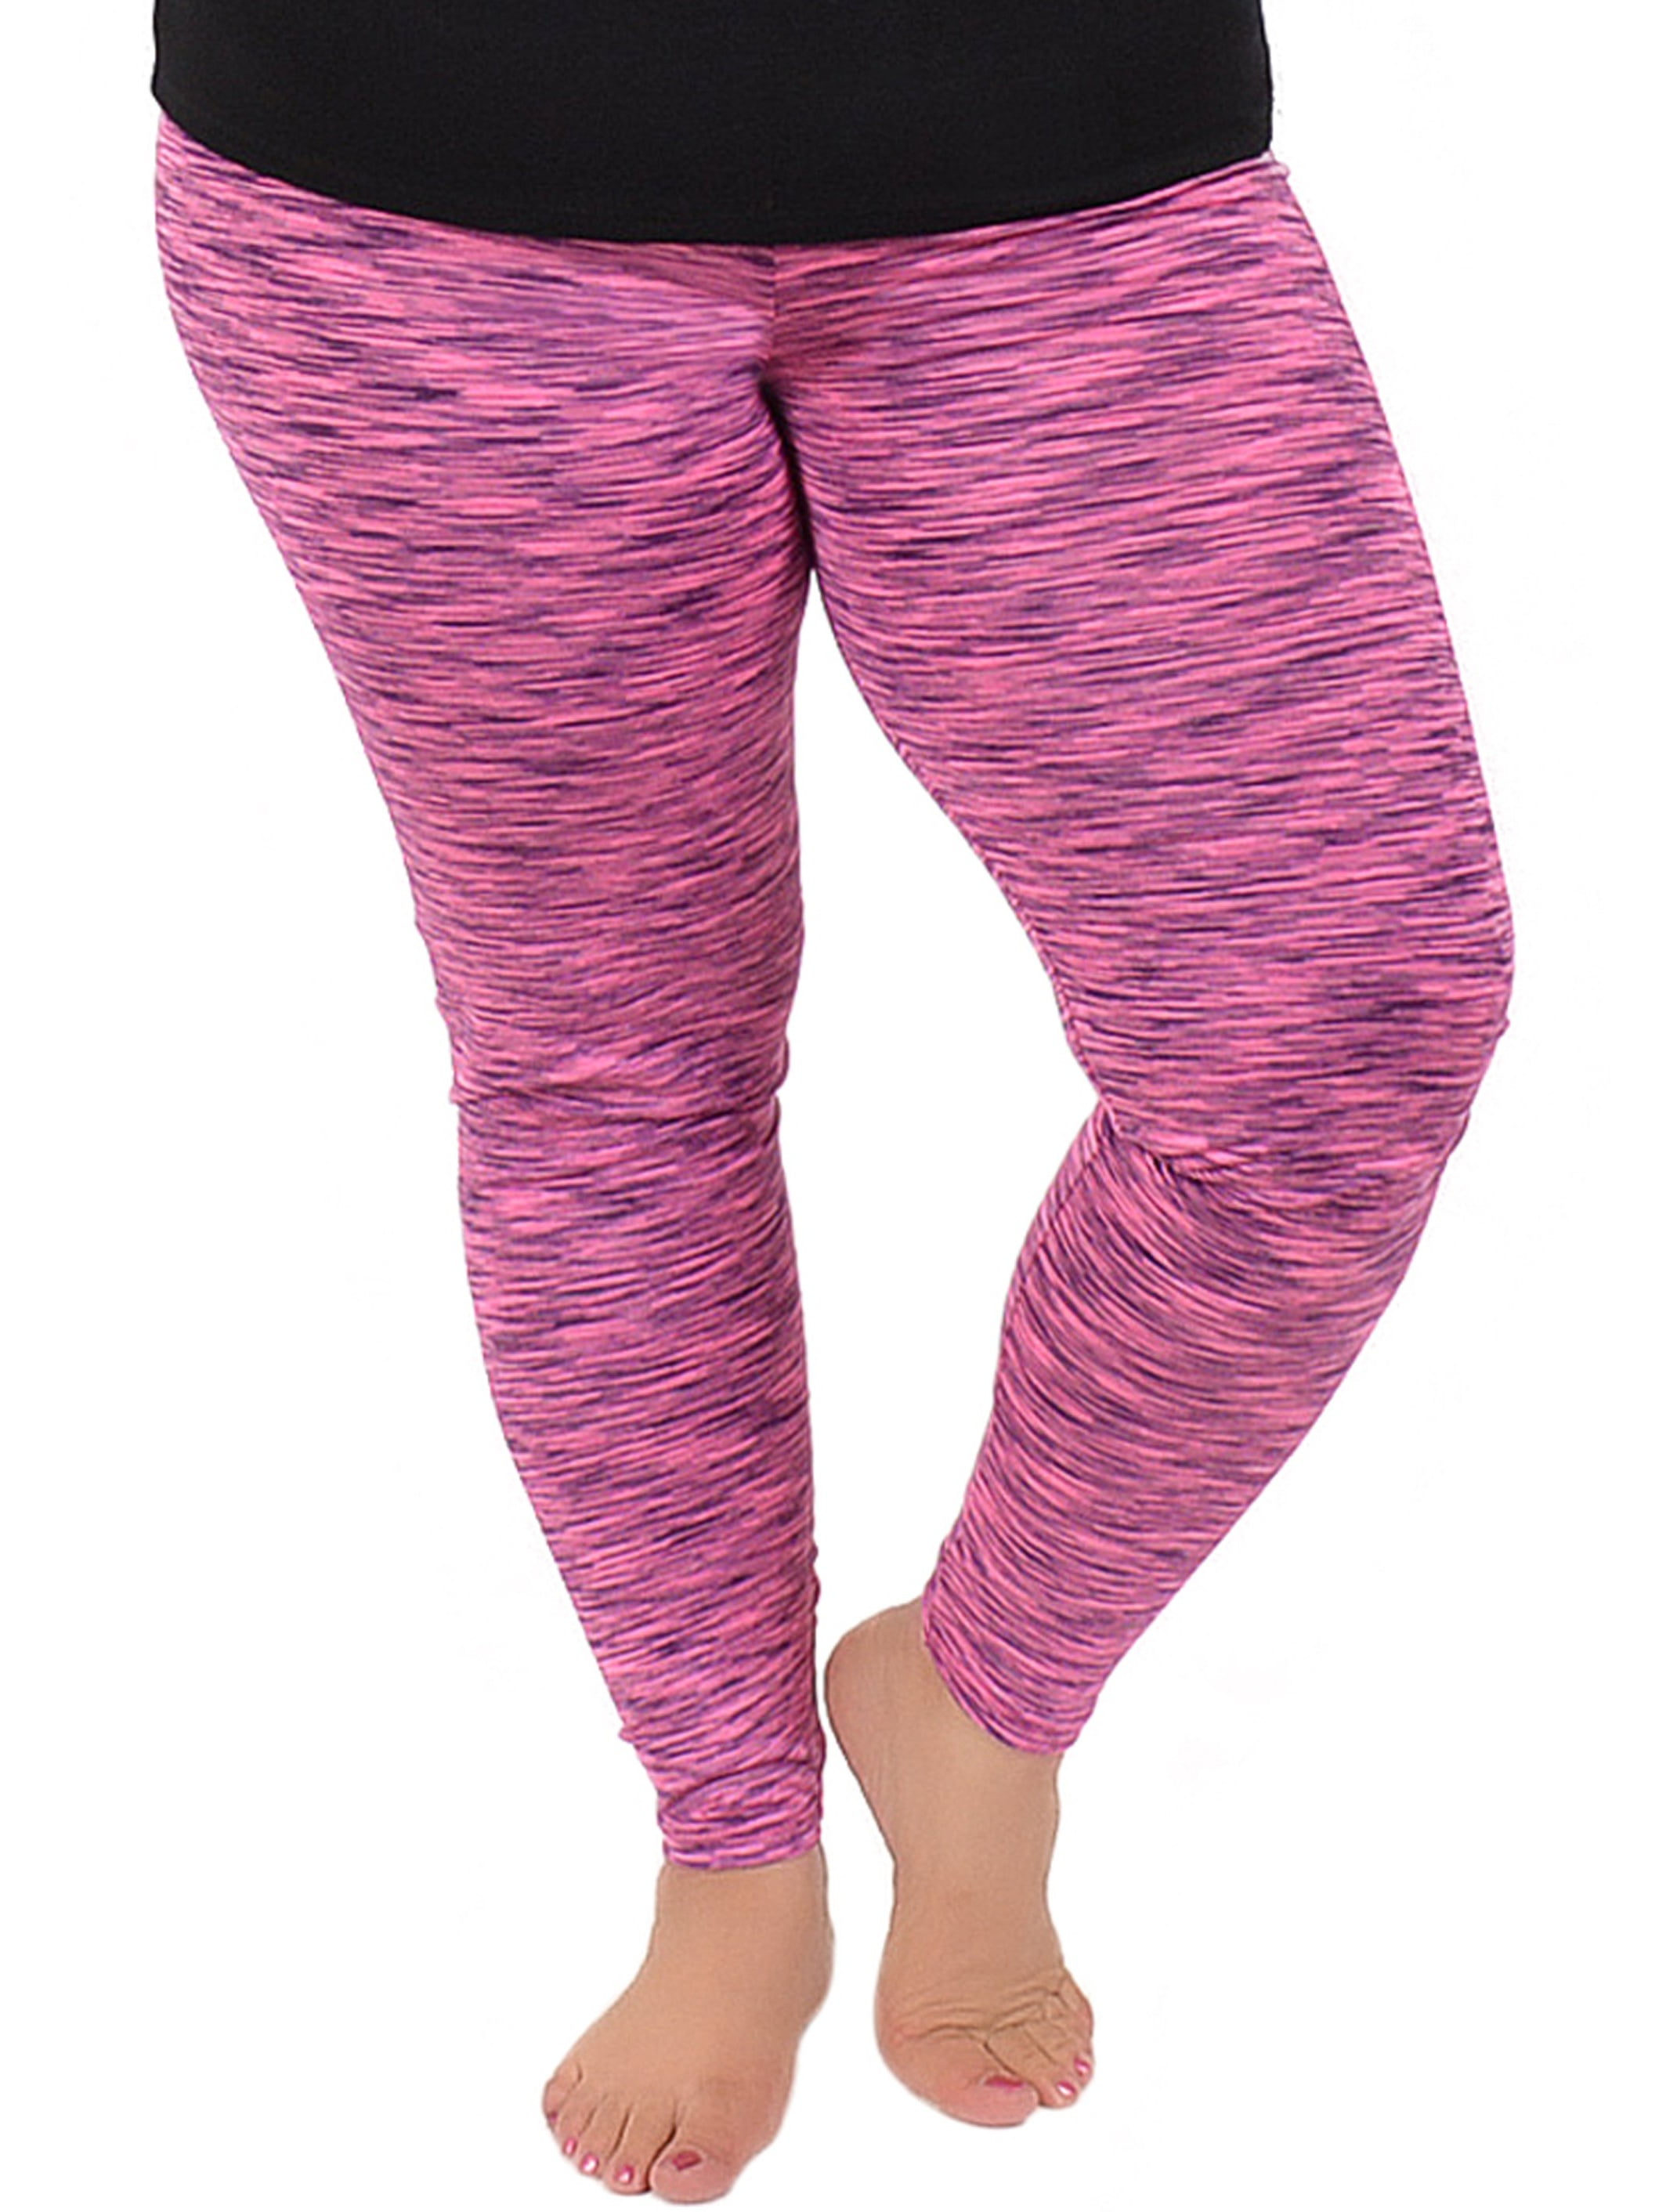 Stretch Is Comfort Women S Plus Size Print Leggings Stretchy X Large 5x Made In The